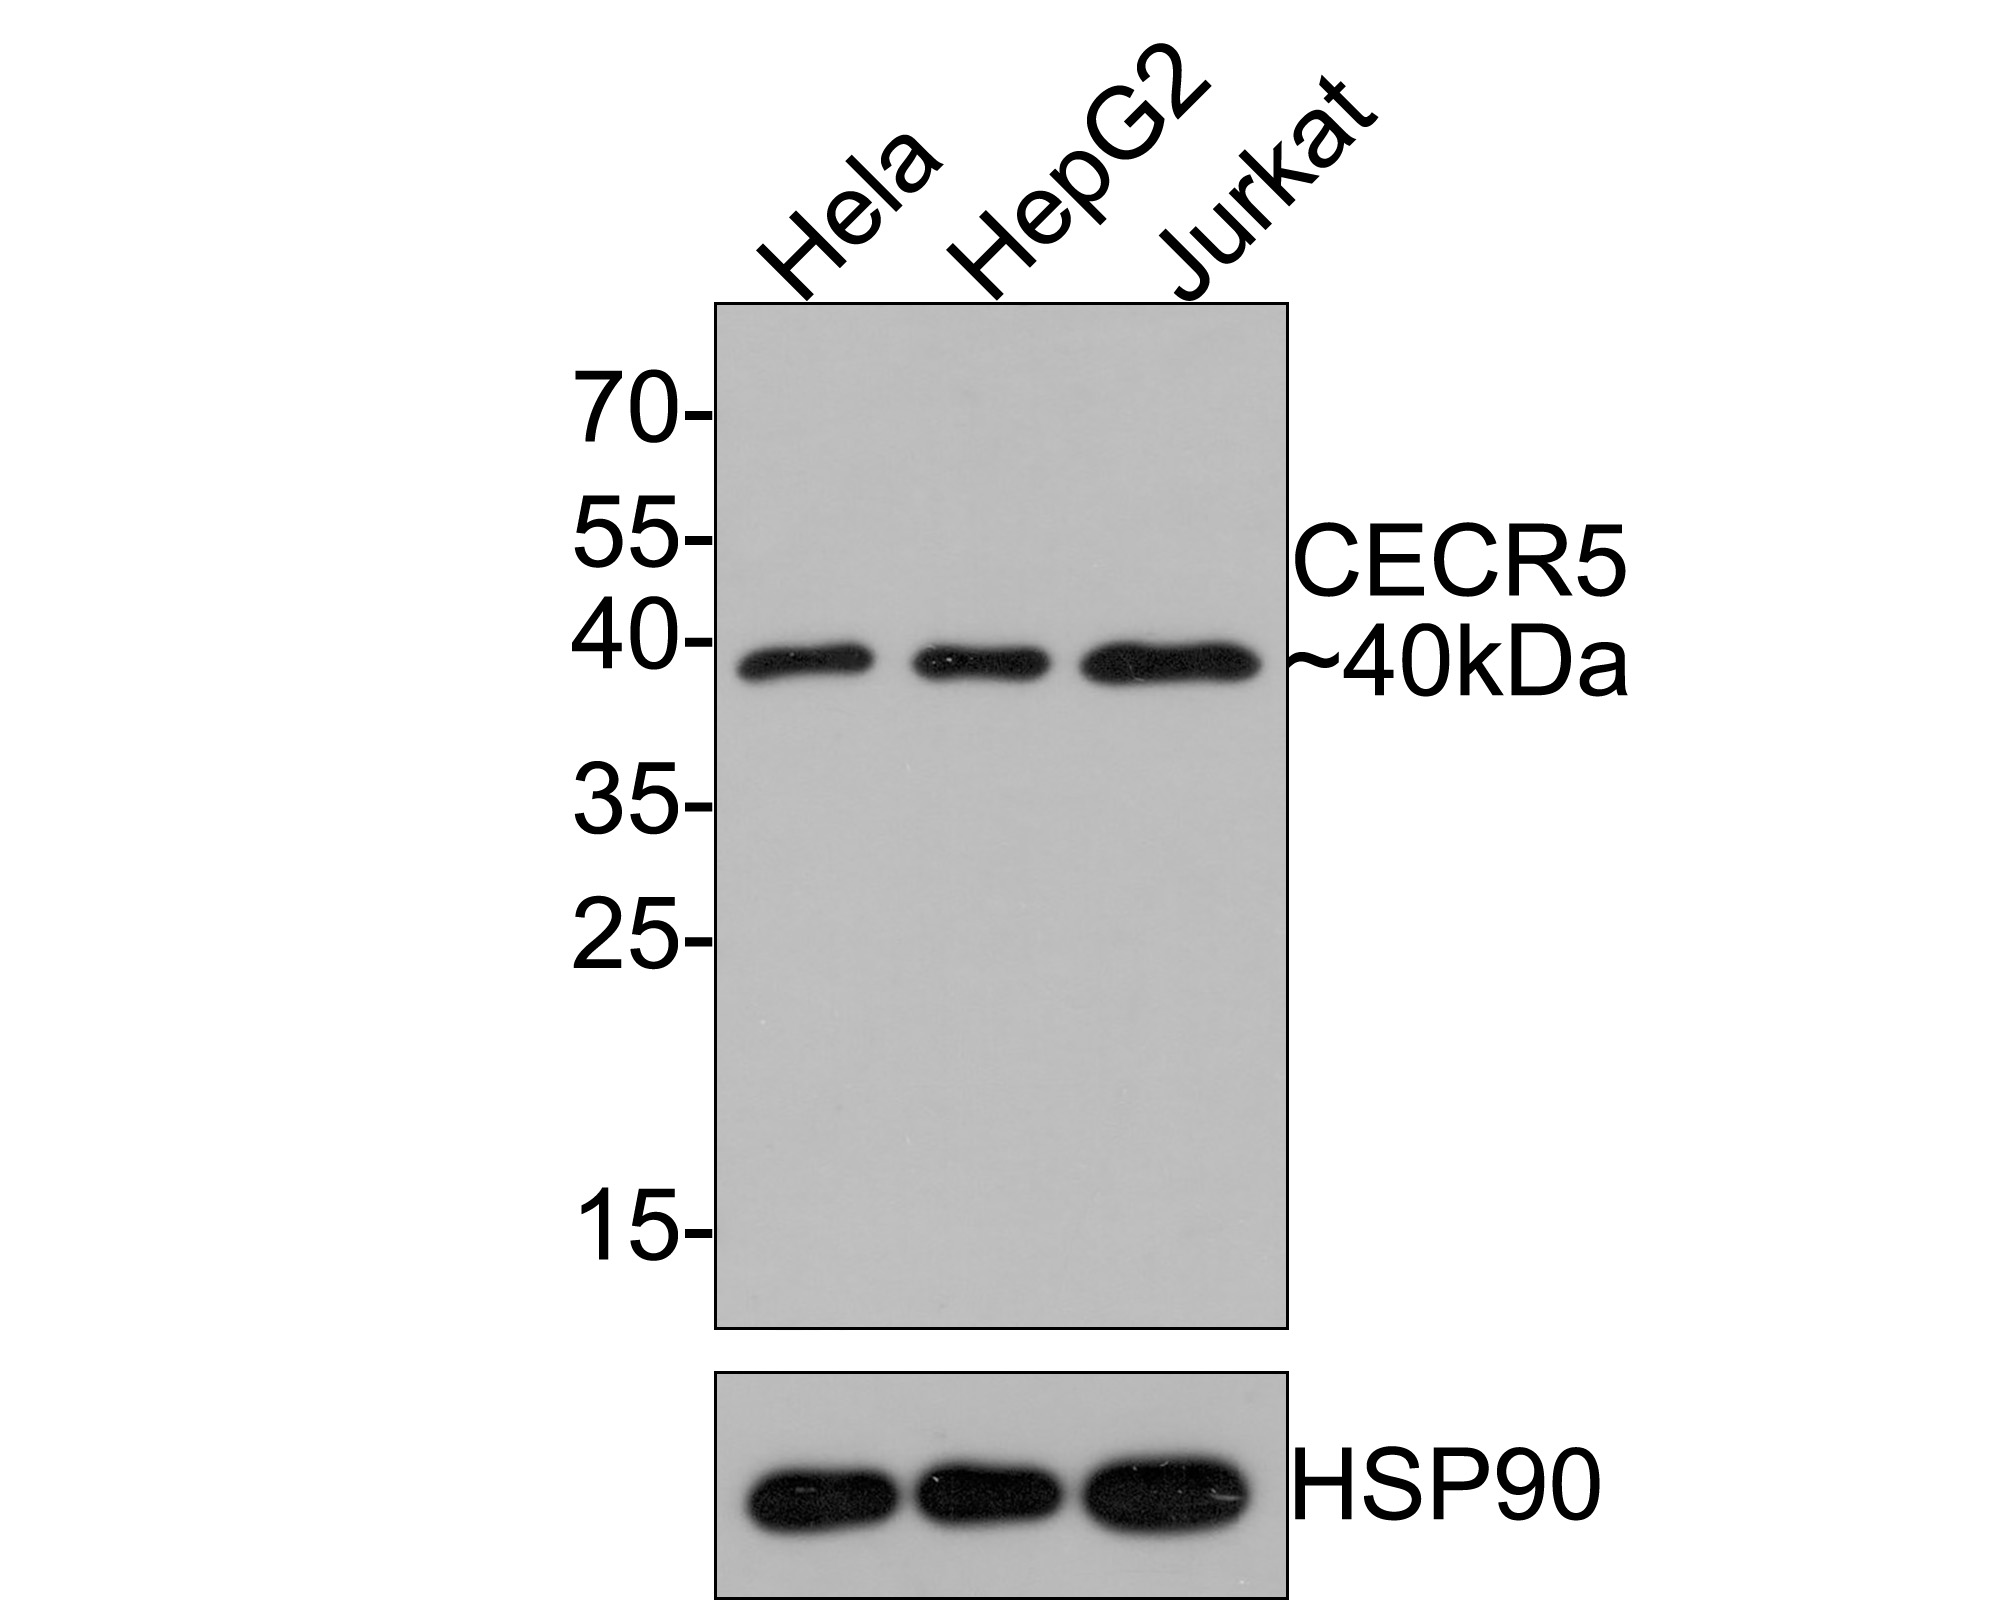 Western blot analysis of CECR5 on different lysates with Rabbit anti-CECR5 antibody (HA721120) at 1/500 dilution.<br />
<br />
Lane 1: Hela cell lysate<br />
Lane 2: HepG2 cell lysate<br />
Lane 3: Jurkat cell lysate<br />
<br />
Lysates/proteins at 10 µg/Lane.<br />
<br />
Predicted band size: 46 kDa<br />
Observed band size: 40 kDa<br />
<br />
Exposure time: 2 minutes;<br />
<br />
12% SDS-PAGE gel.<br />
<br />
Proteins were transferred to a PVDF membrane and blocked with 5% NFDM/TBST for 1 hour at room temperature. The primary antibody (HA721120) at 1/500 dilution was used in 5% NFDM/TBST at room temperature for 2 hours. Goat Anti-Rabbit IgG - HRP Secondary Antibody (HA1001) at 1:300,000 dilution was used for 1 hour at room temperature.